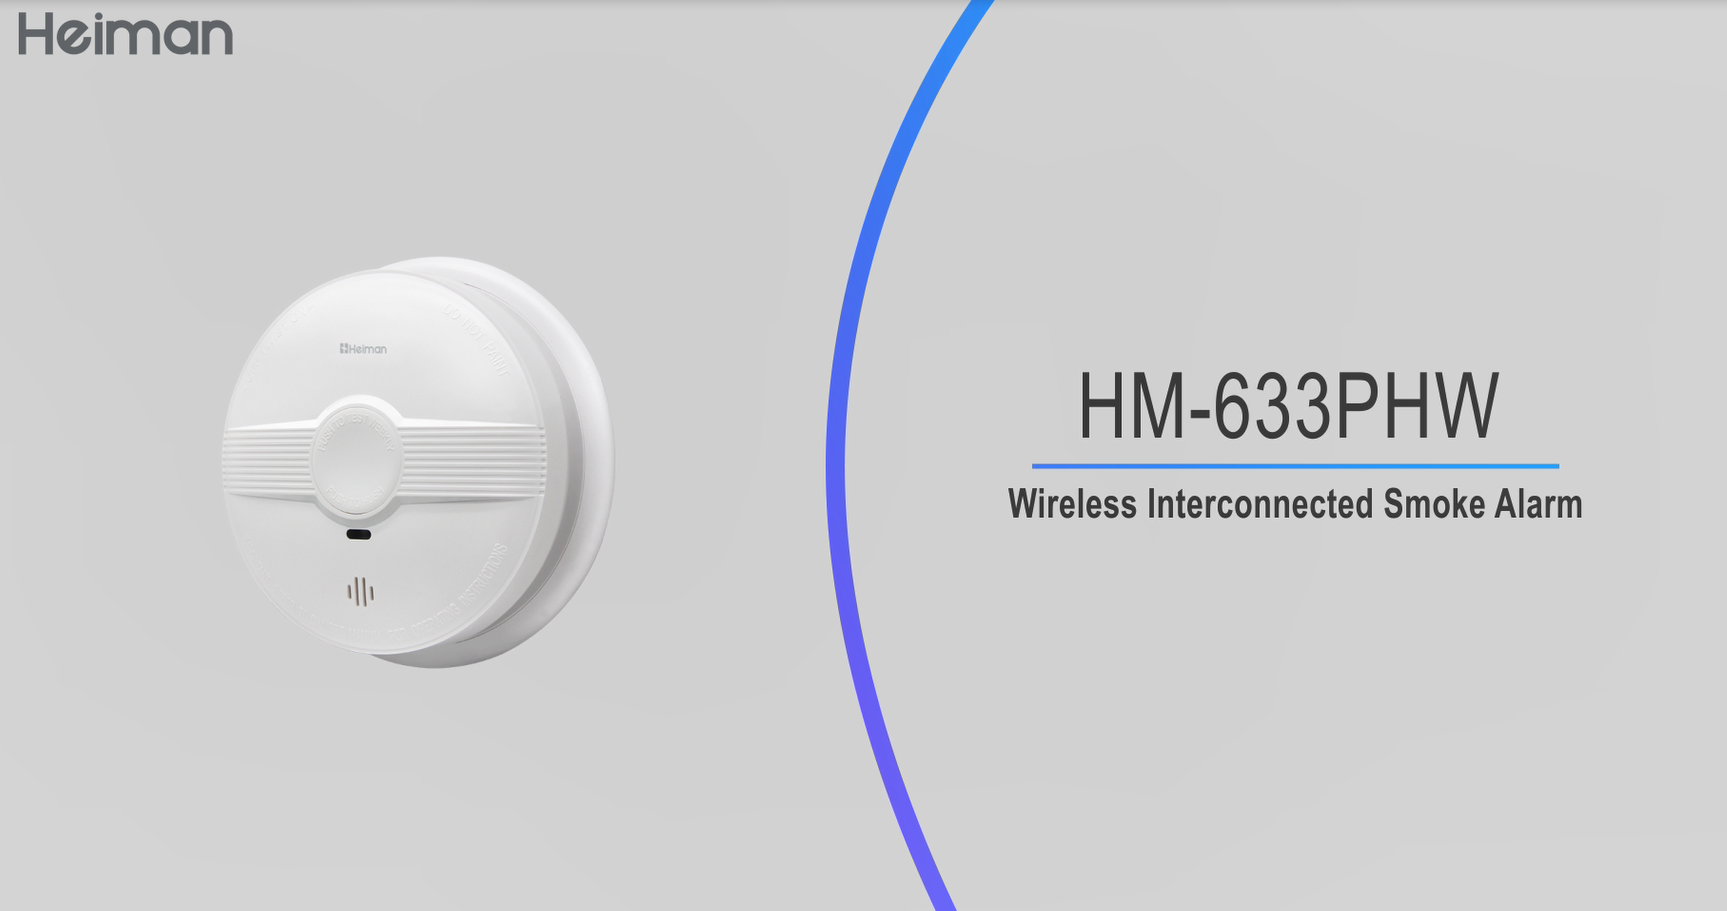 Wireless Interconnected Smoke Alarm with 10-year battery Heiman HM-633PHW